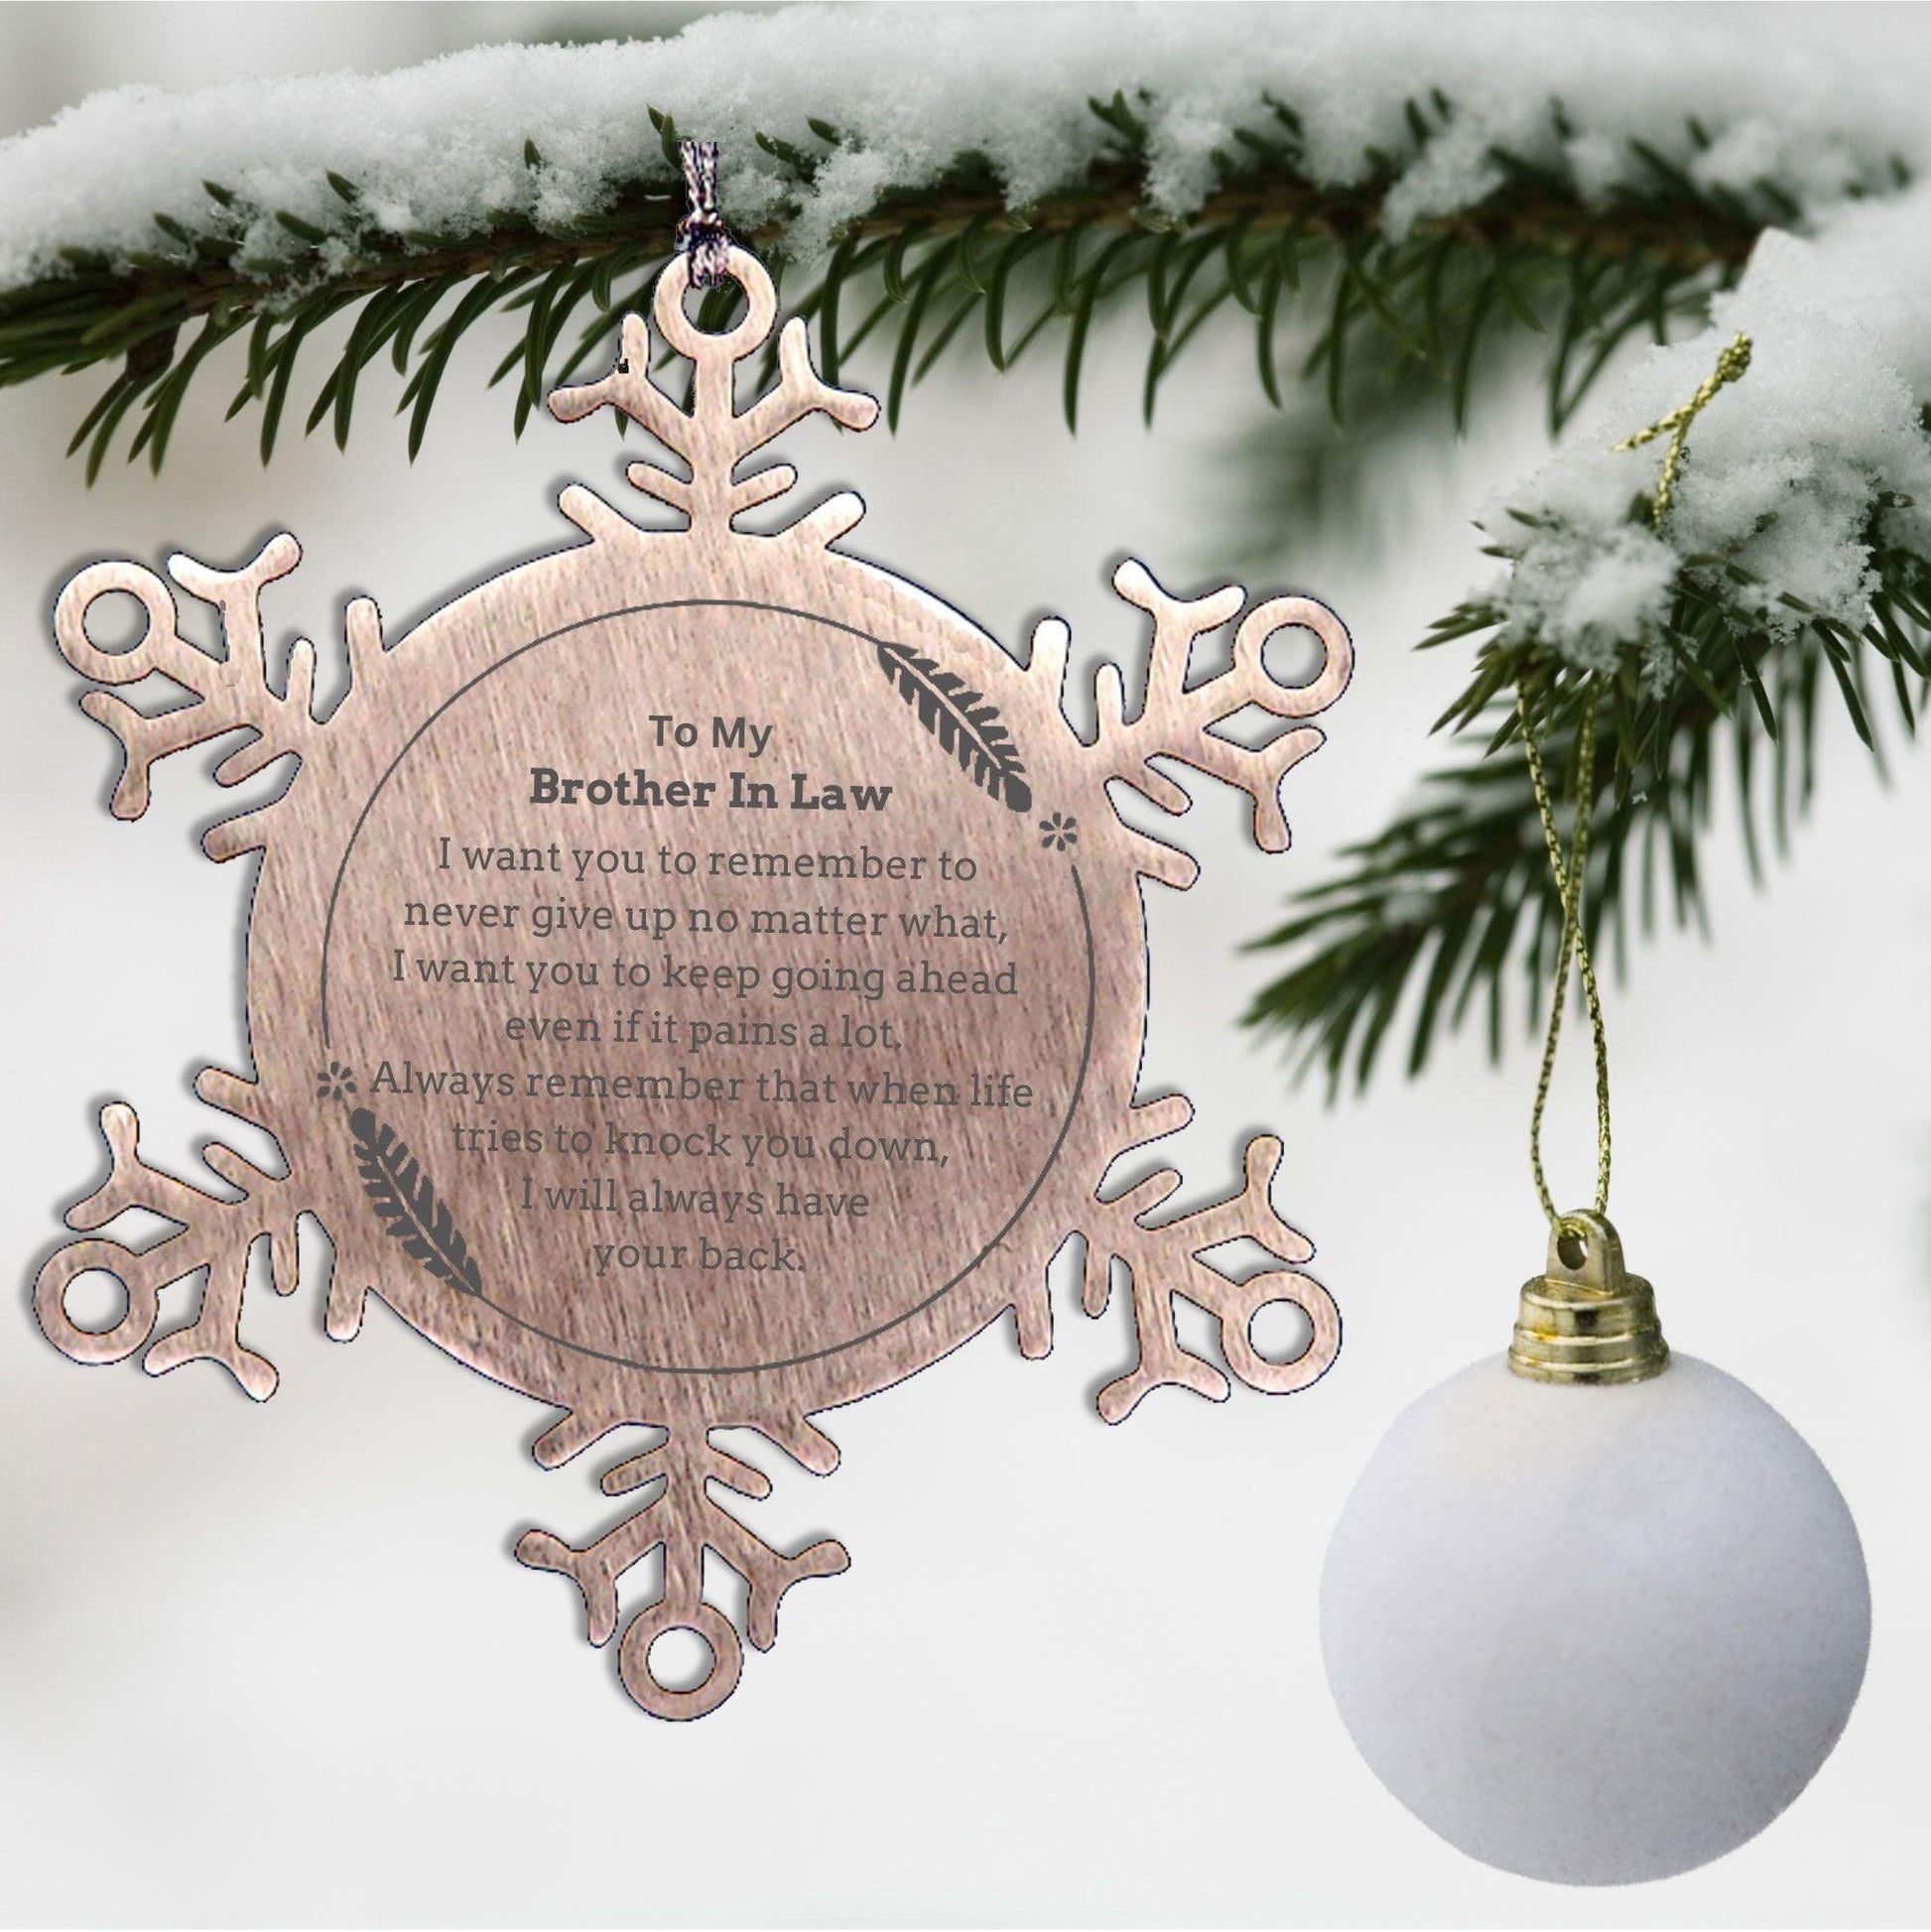 To My Brother In Law Gifts, Never give up no matter what, Inspirational Brother In Law Snowflake Ornament, Encouragement Birthday Christmas Unique Gifts For Brother In Law - Mallard Moon Gift Shop